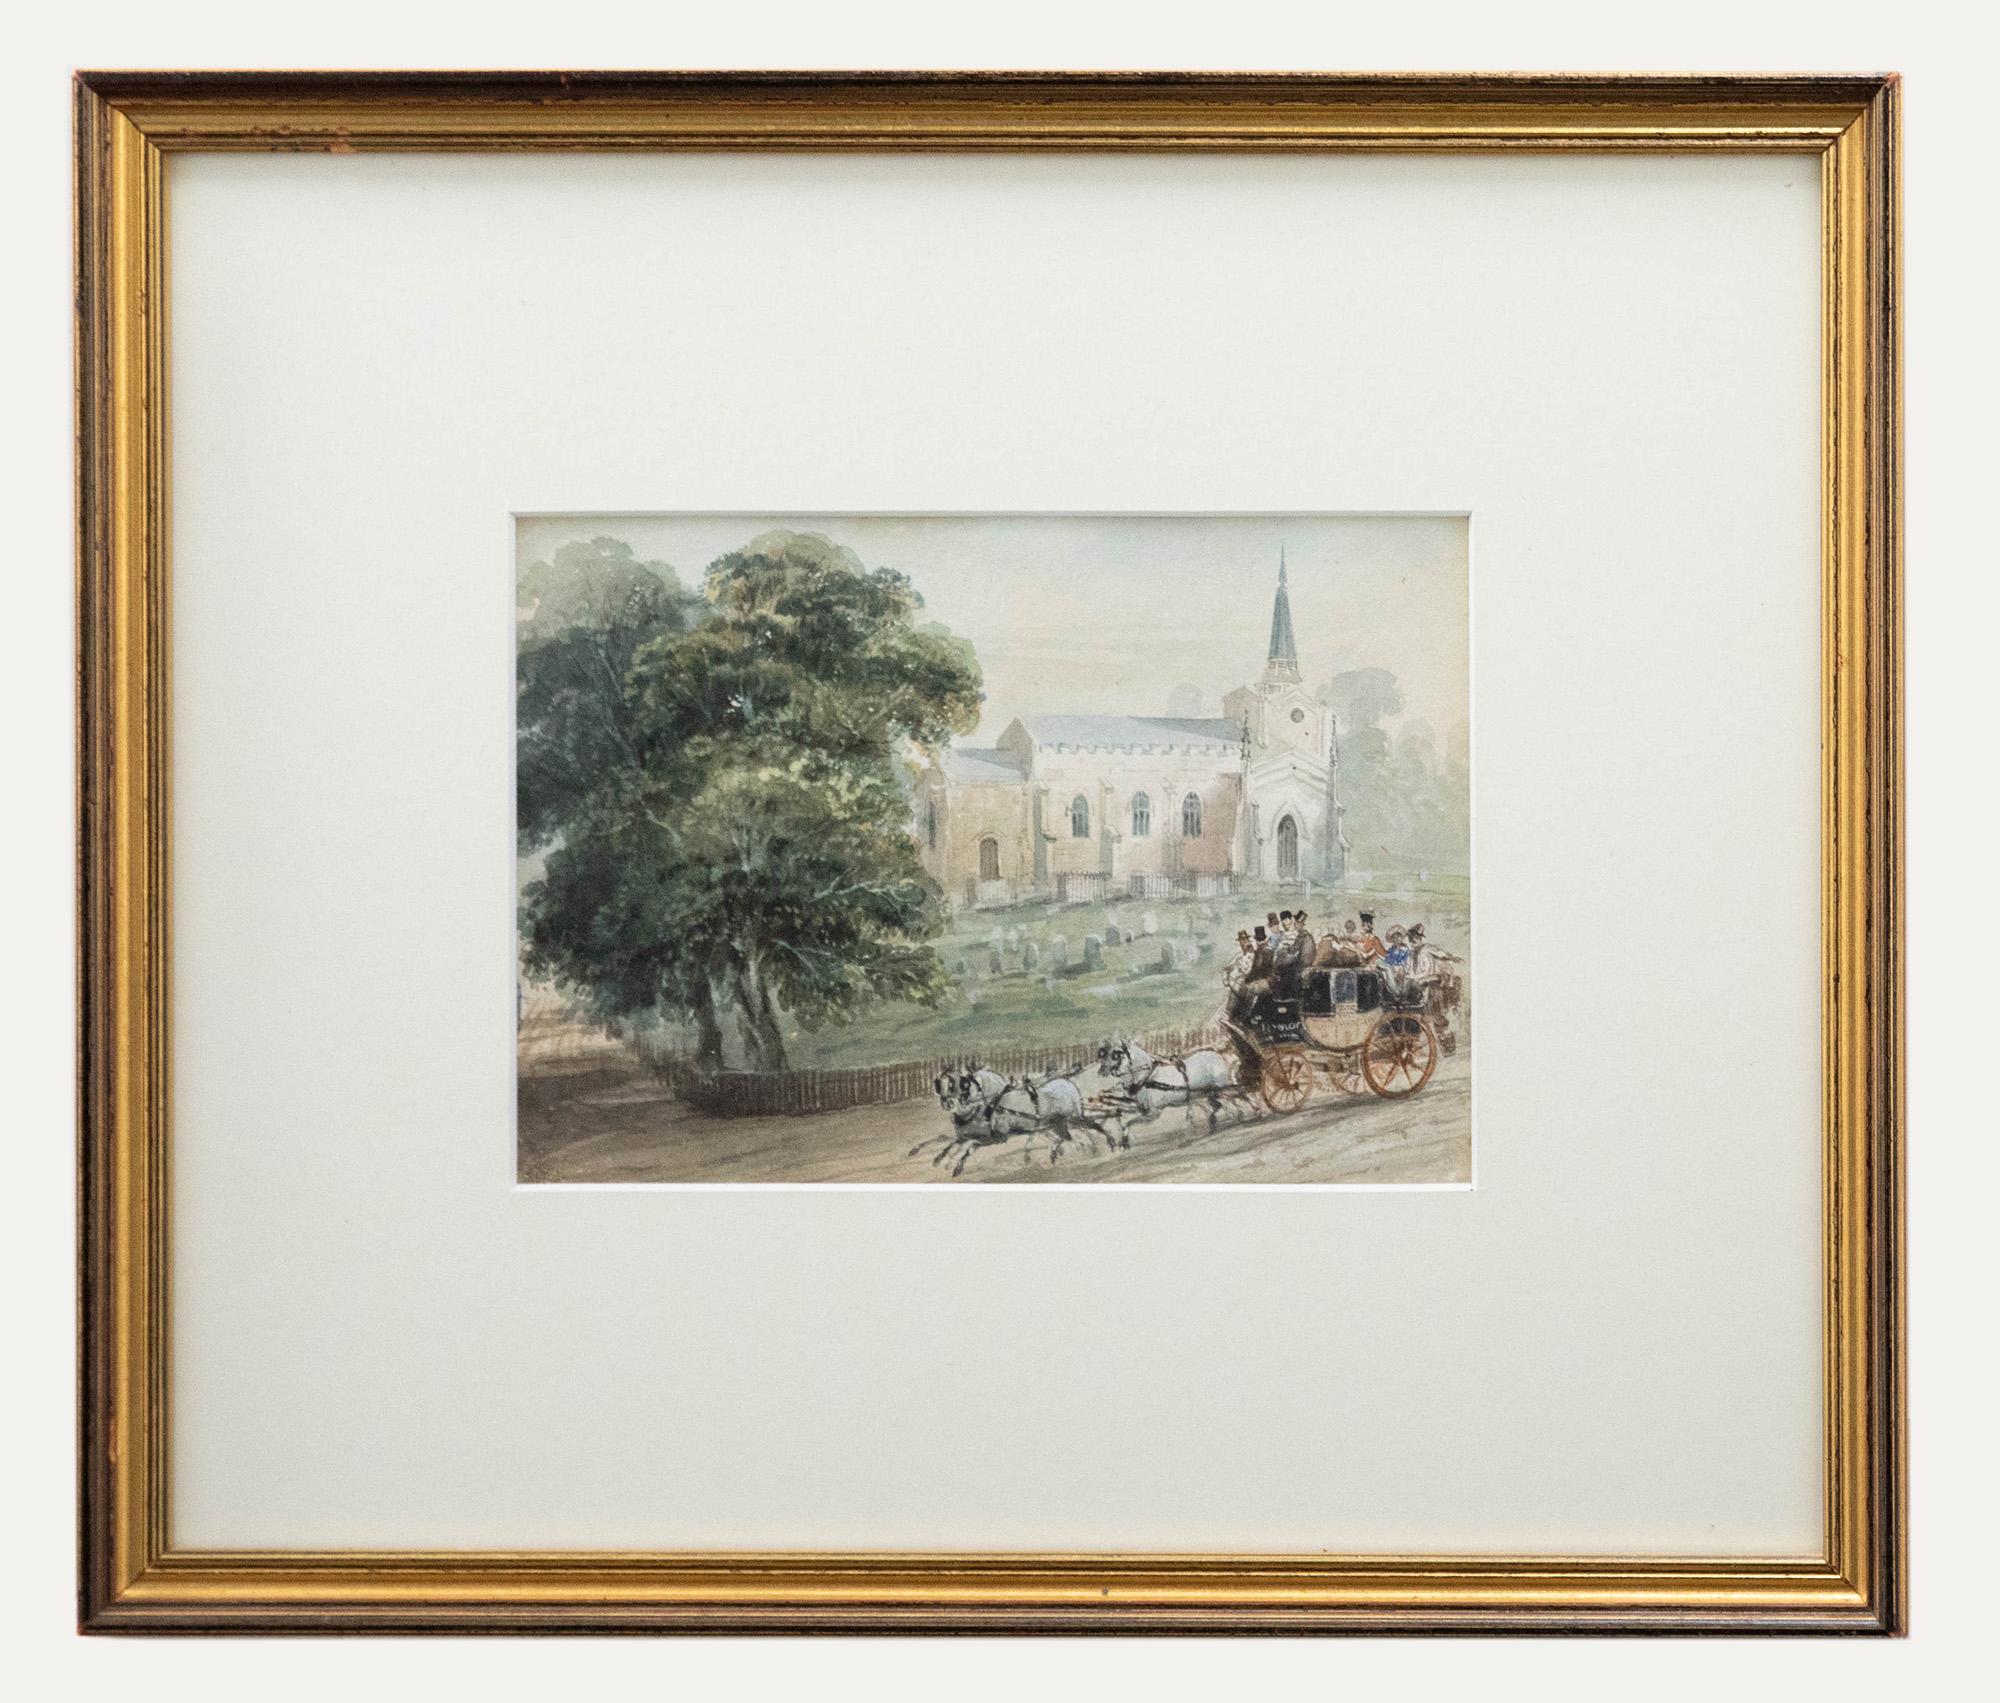 Unknown Landscape Art - Framed 19th Century Watercolour - Coach & Horses by a Church